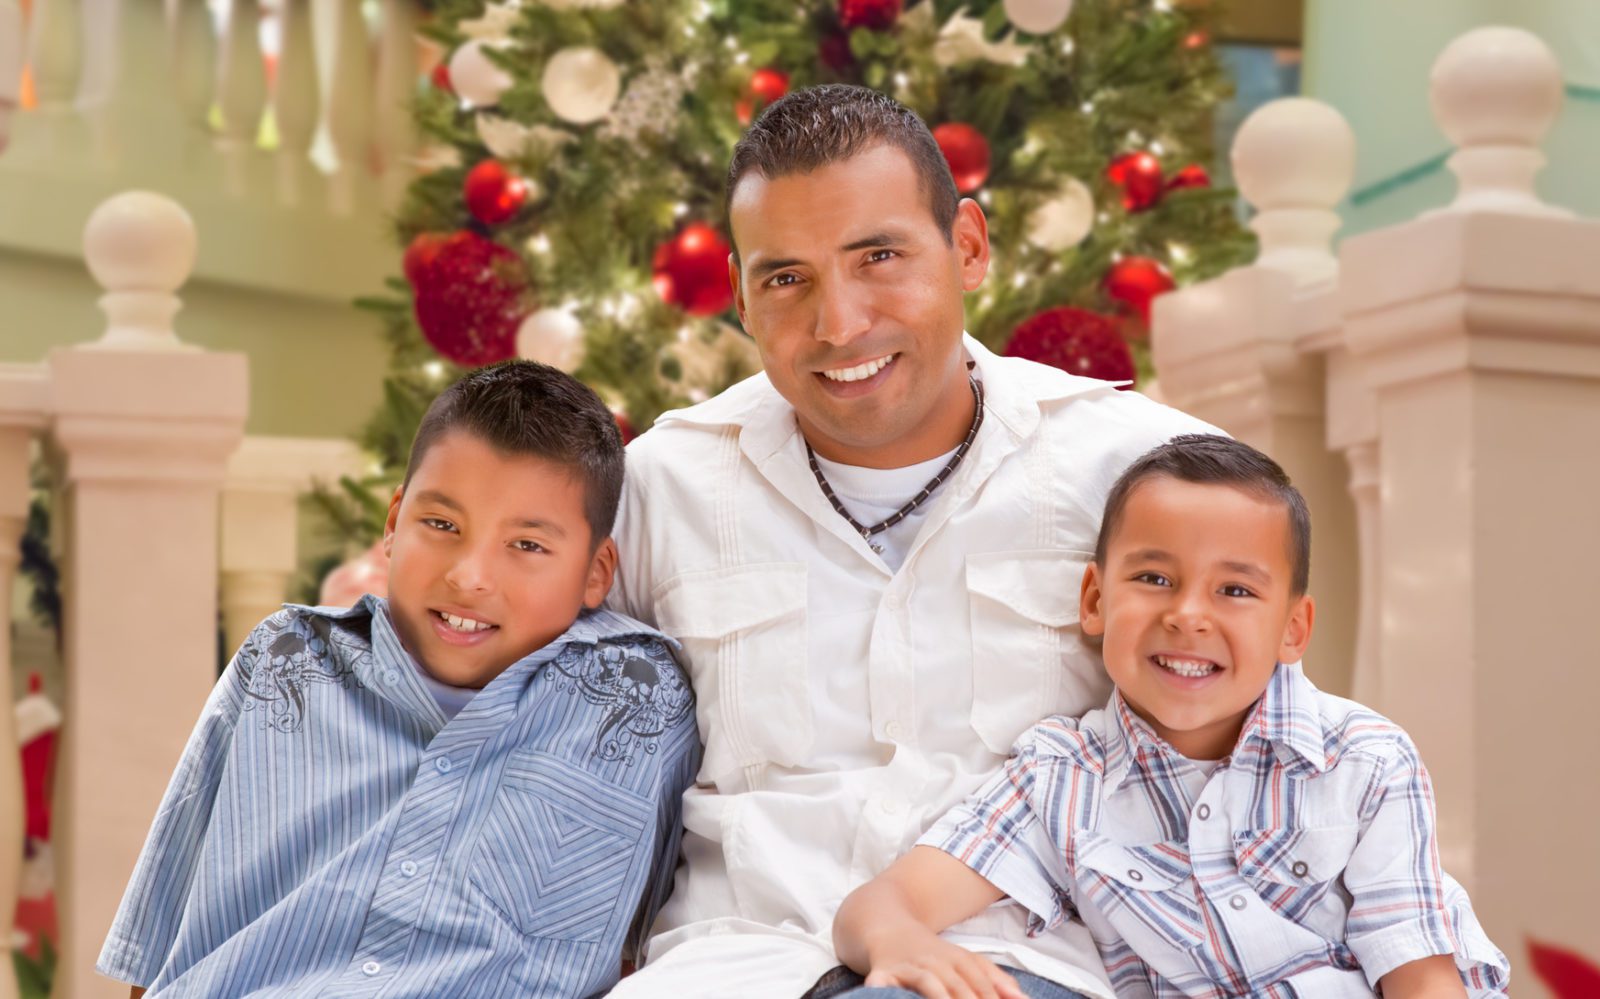 Q: What are some important considerations to keep in mind for Holiday parenting time?